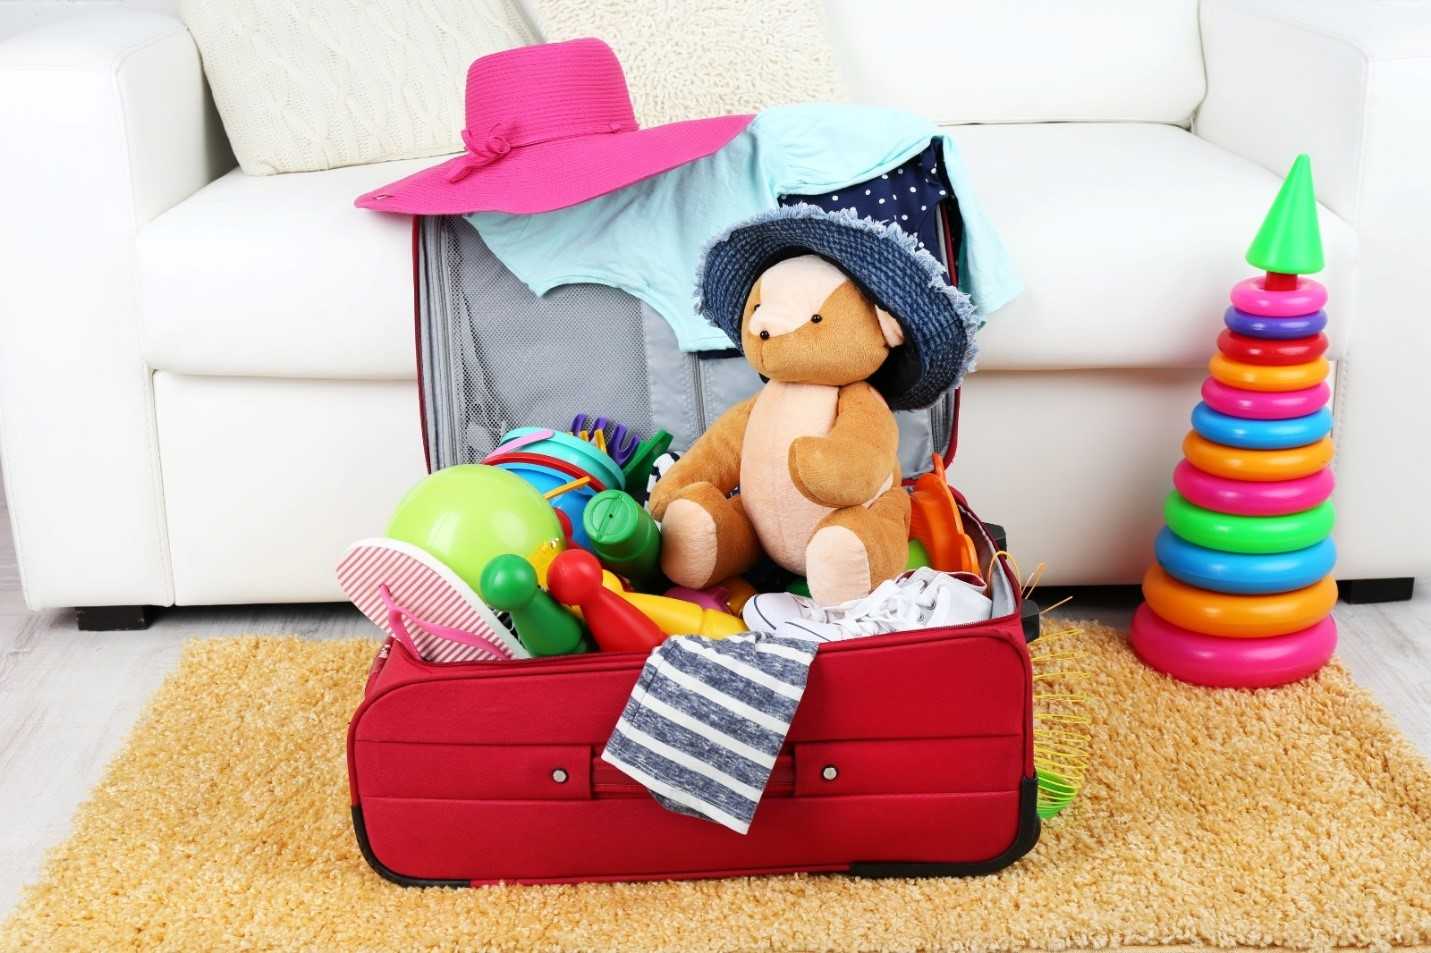 Top 10 baby products to make traveling easier